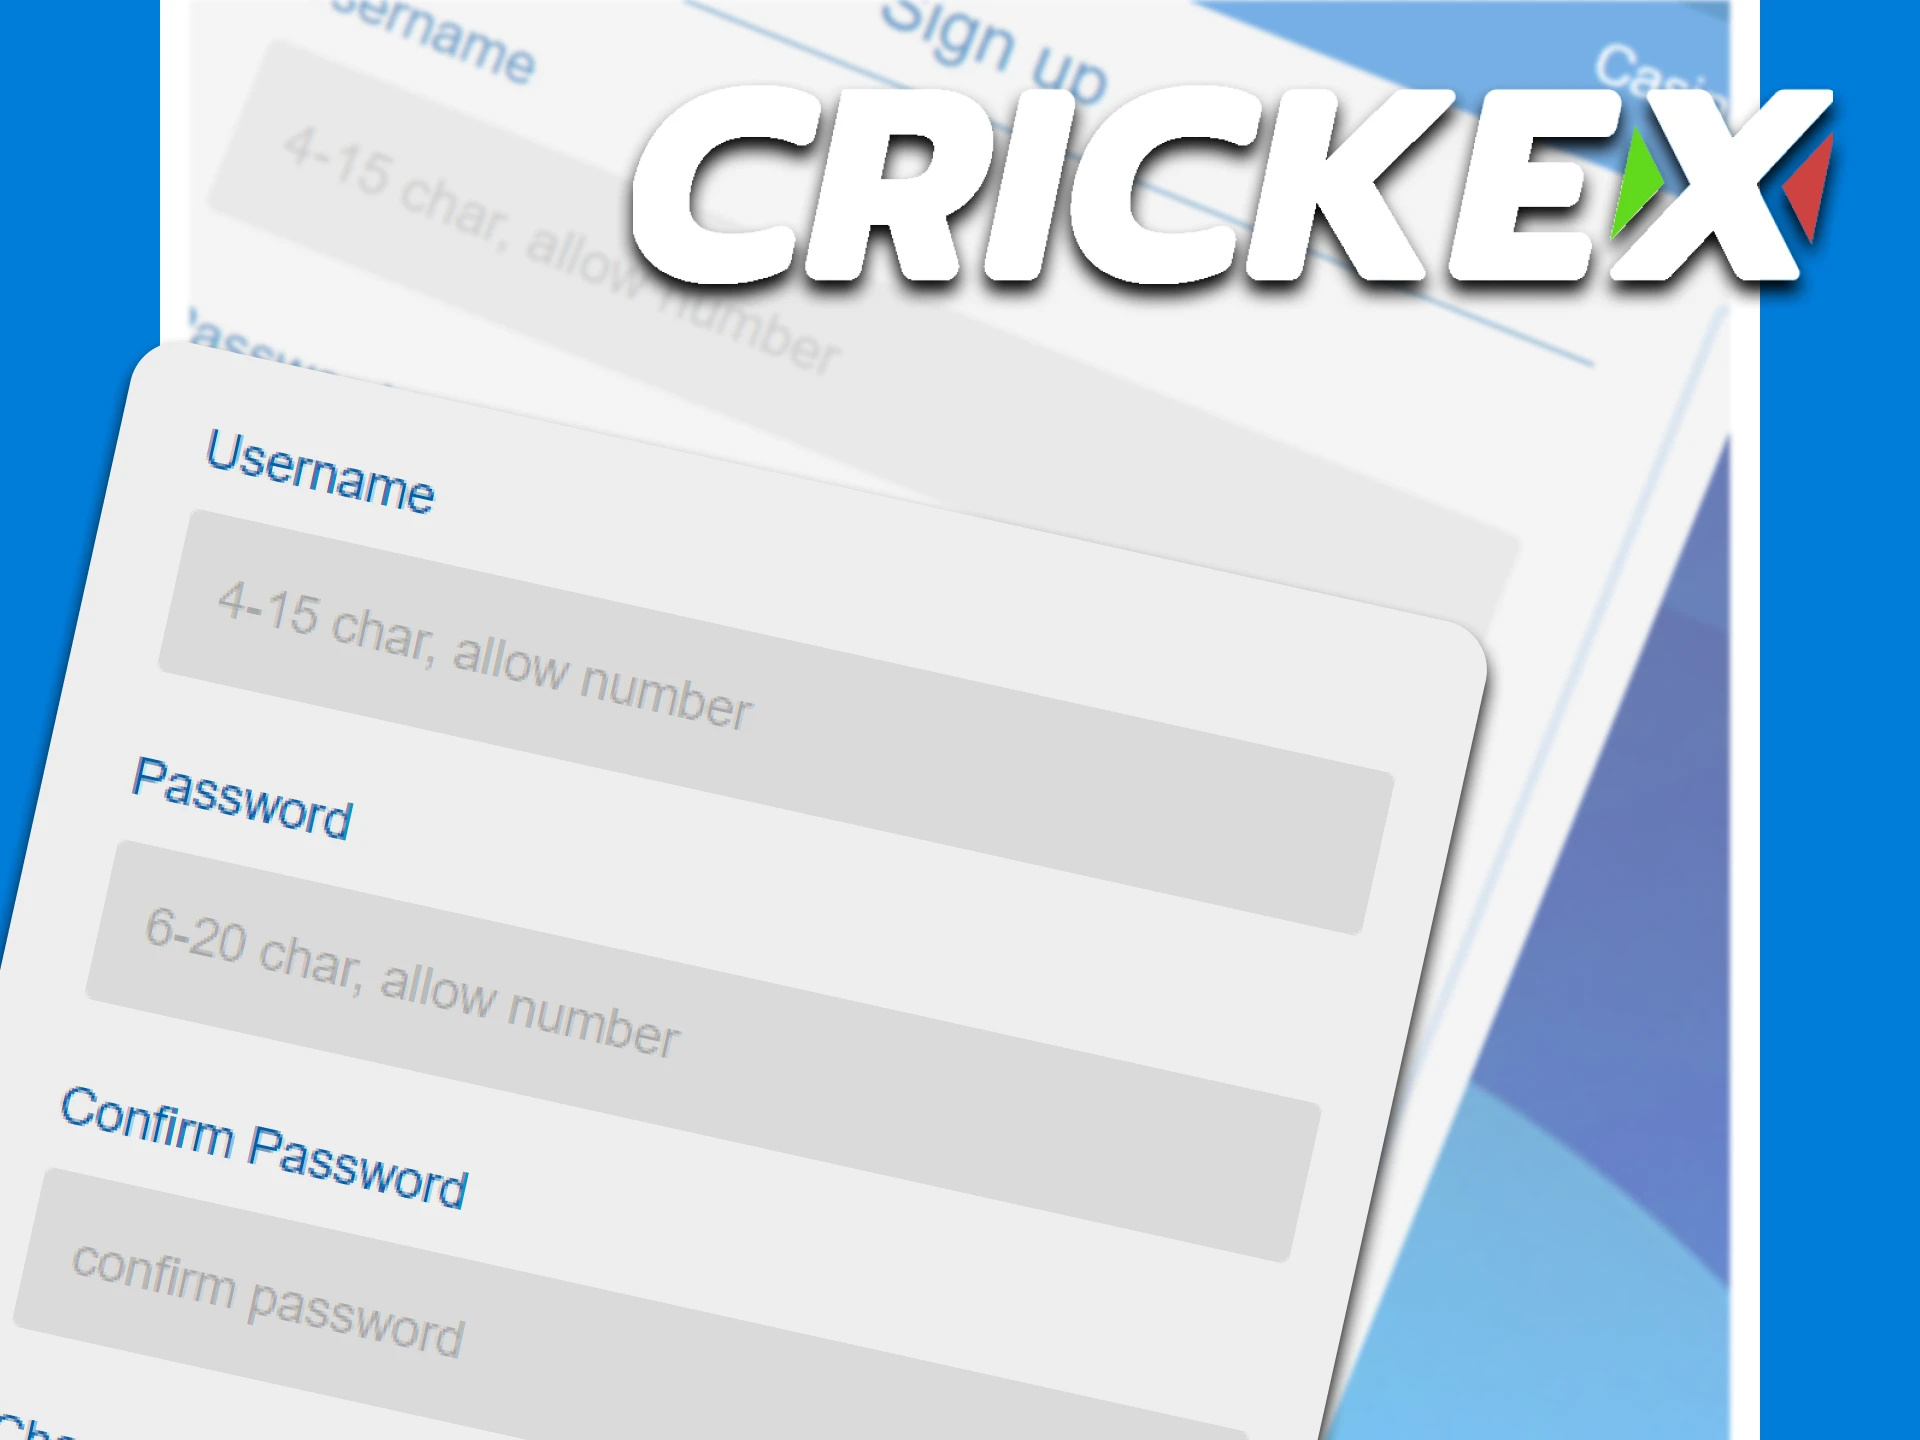 To use the Crickex service, you need to fill in personal data.